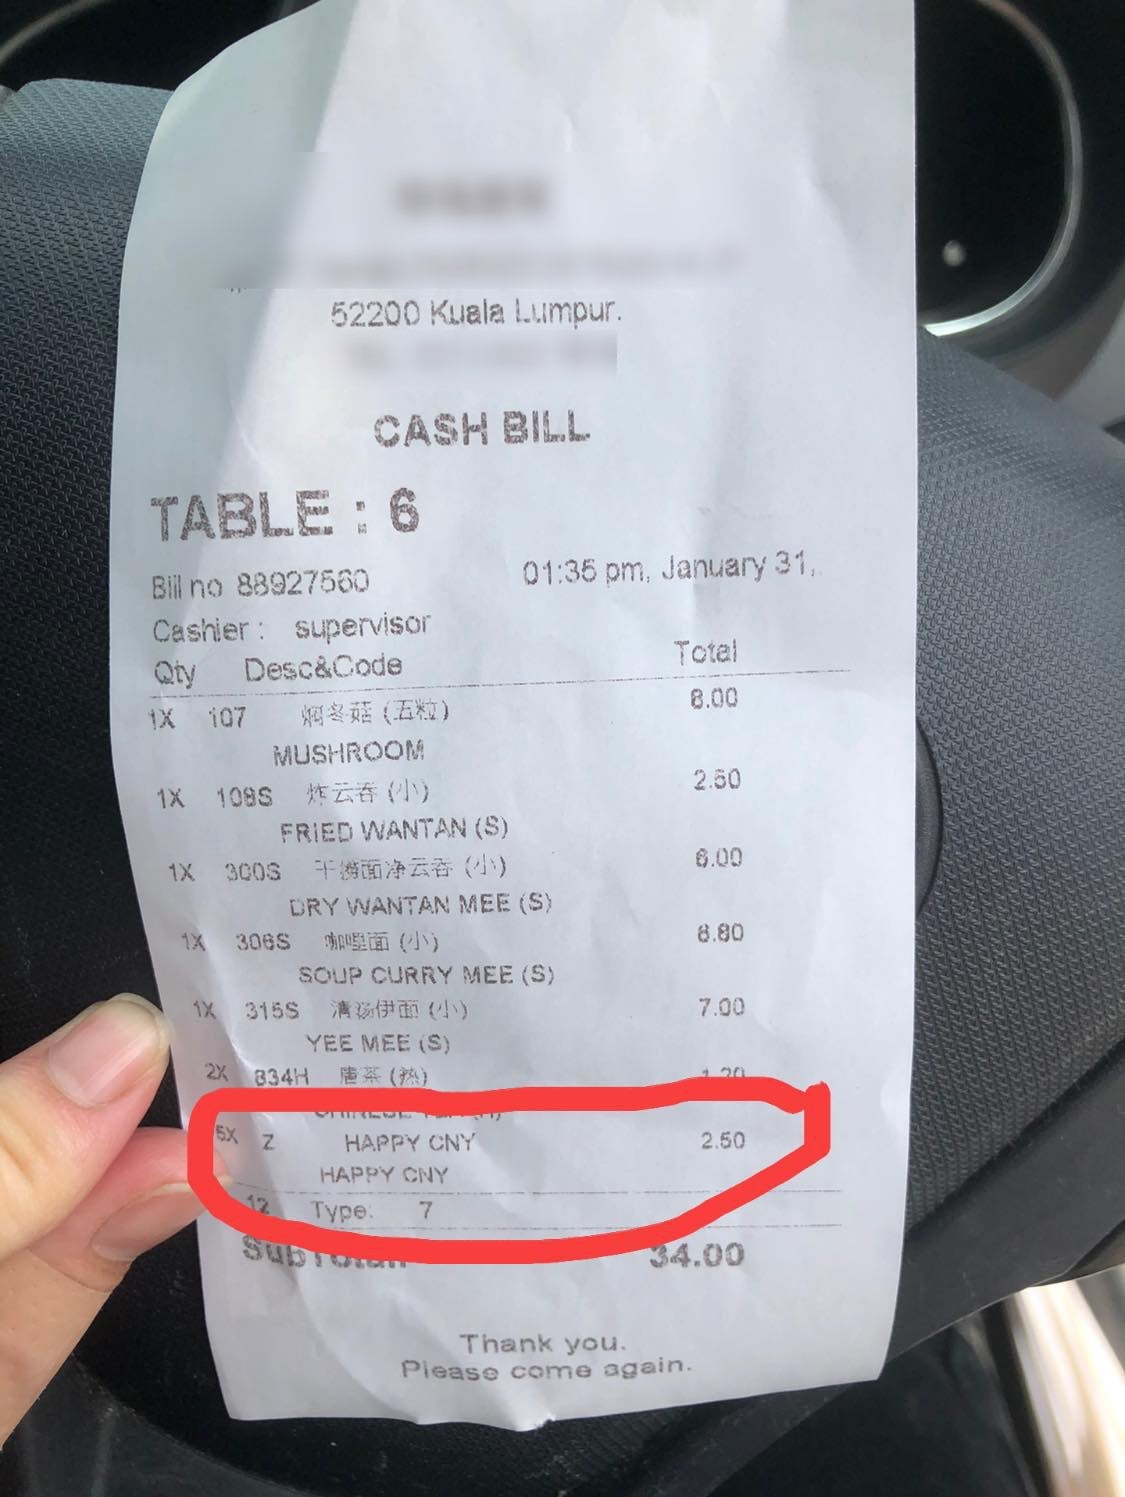 Woman Shares How a Restaurant in KL Billed Her a "Happy CNY" - WORLD OF BUZZ